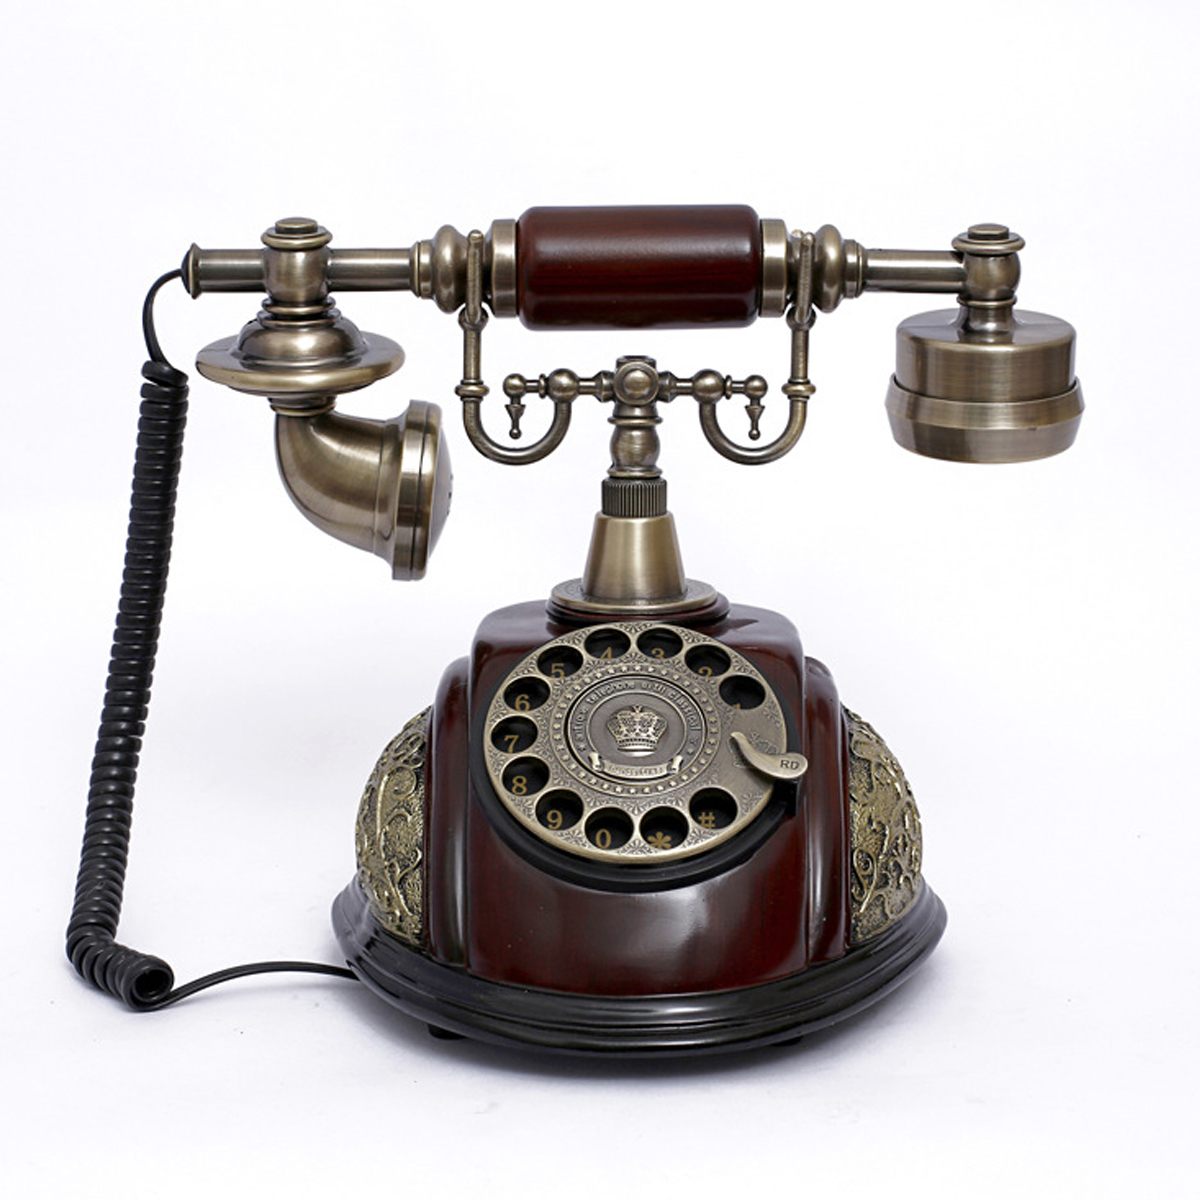 

Vintage Antique Style Rotary Phone Fashioned Retro Handset Old Telephone Home Office Decor